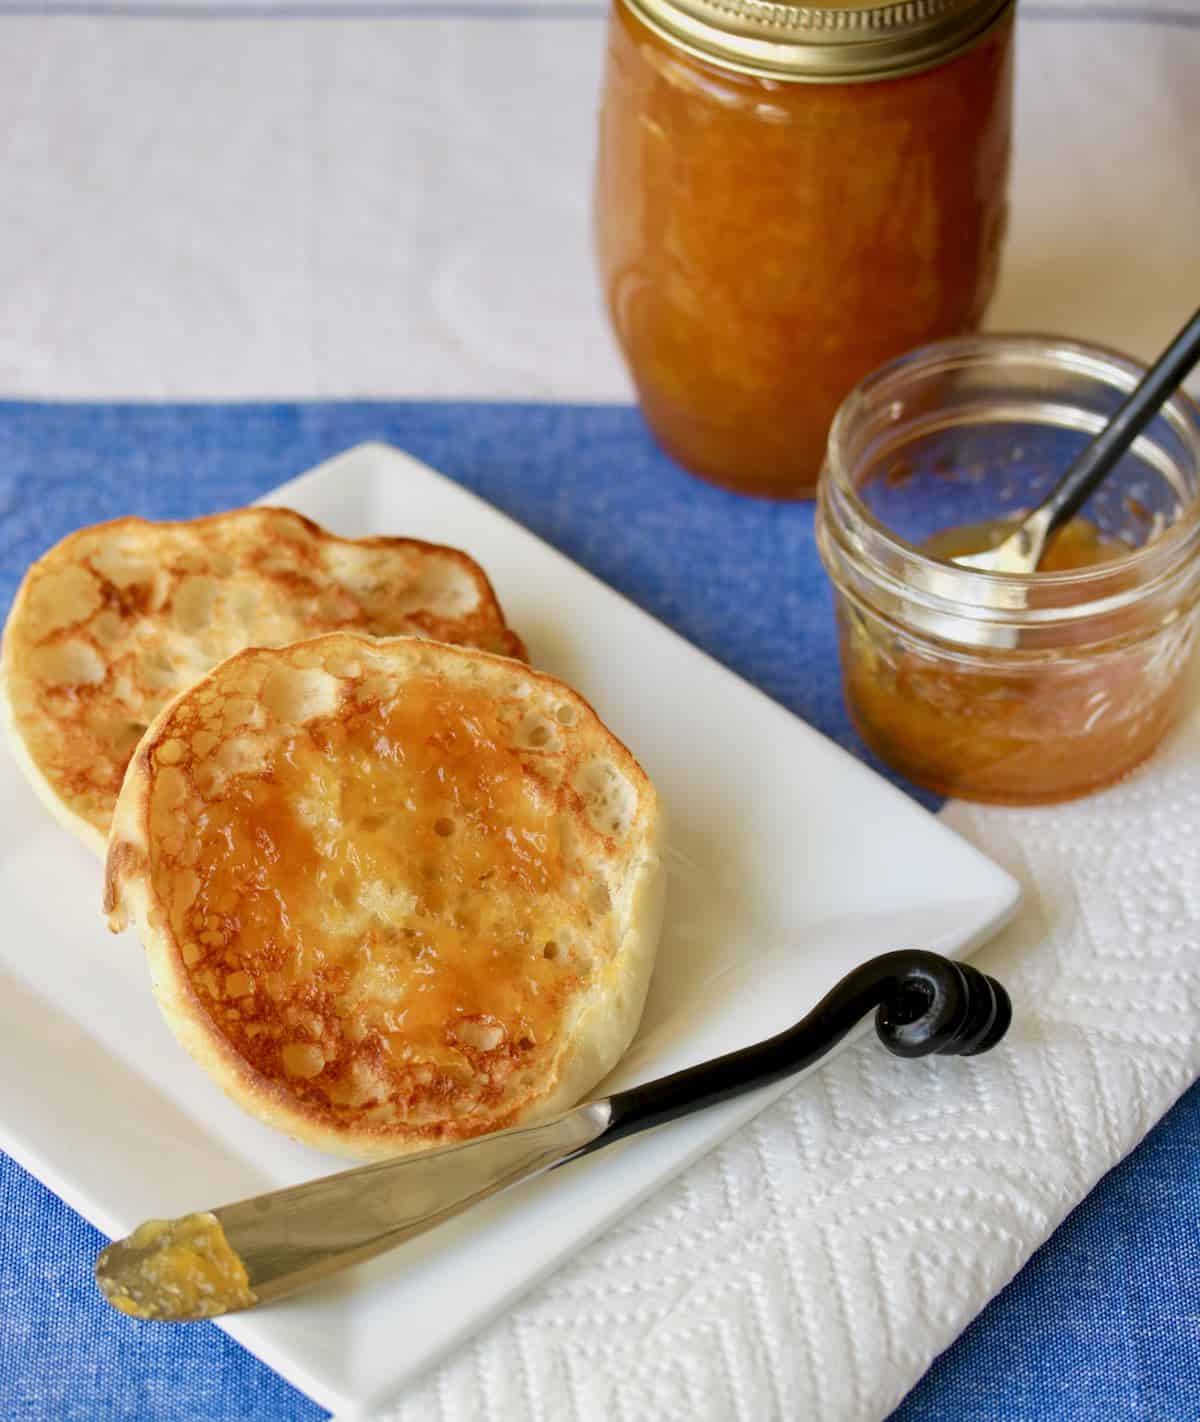 Toasted English muffins with spirited peach jam.